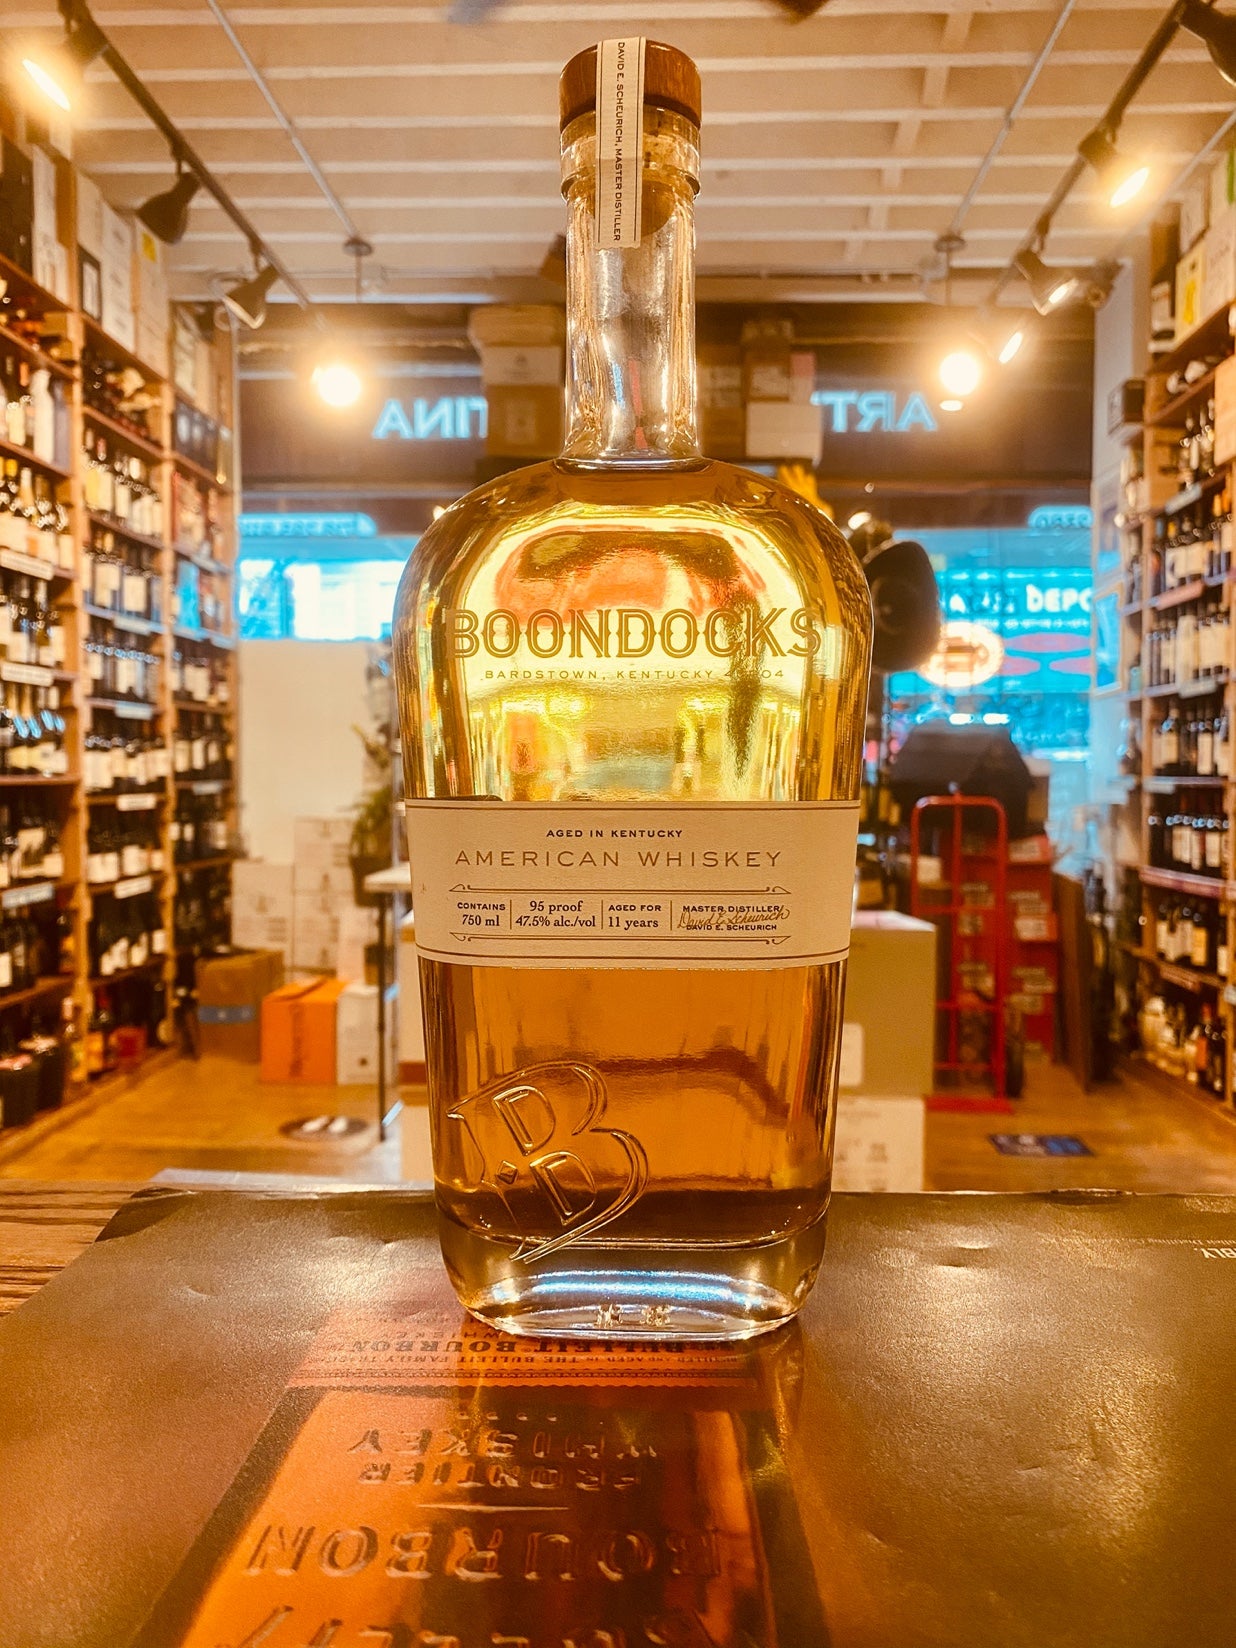 Boondocks American Whiskey 750ml 11yr old tall flat rounded clear bottle with a white label.